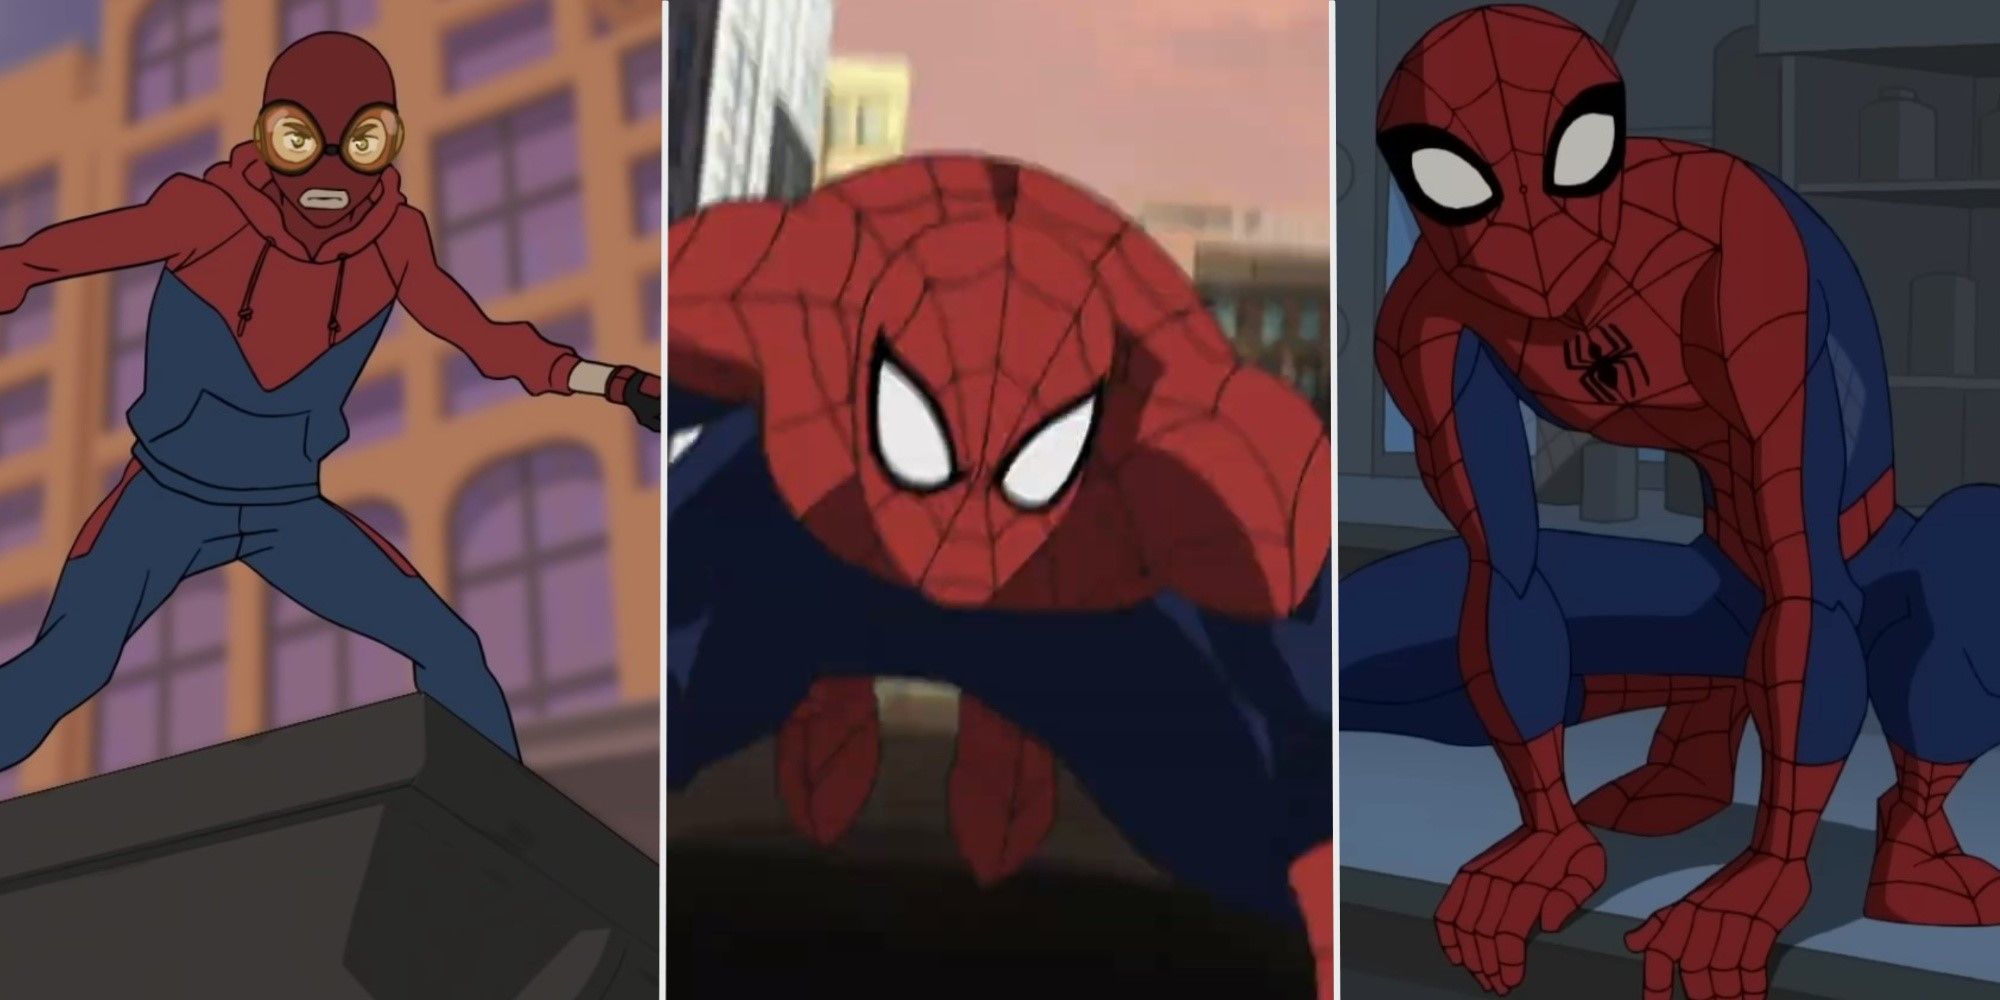 A split image showing Spider-Men from three different animated Spider-Man shows